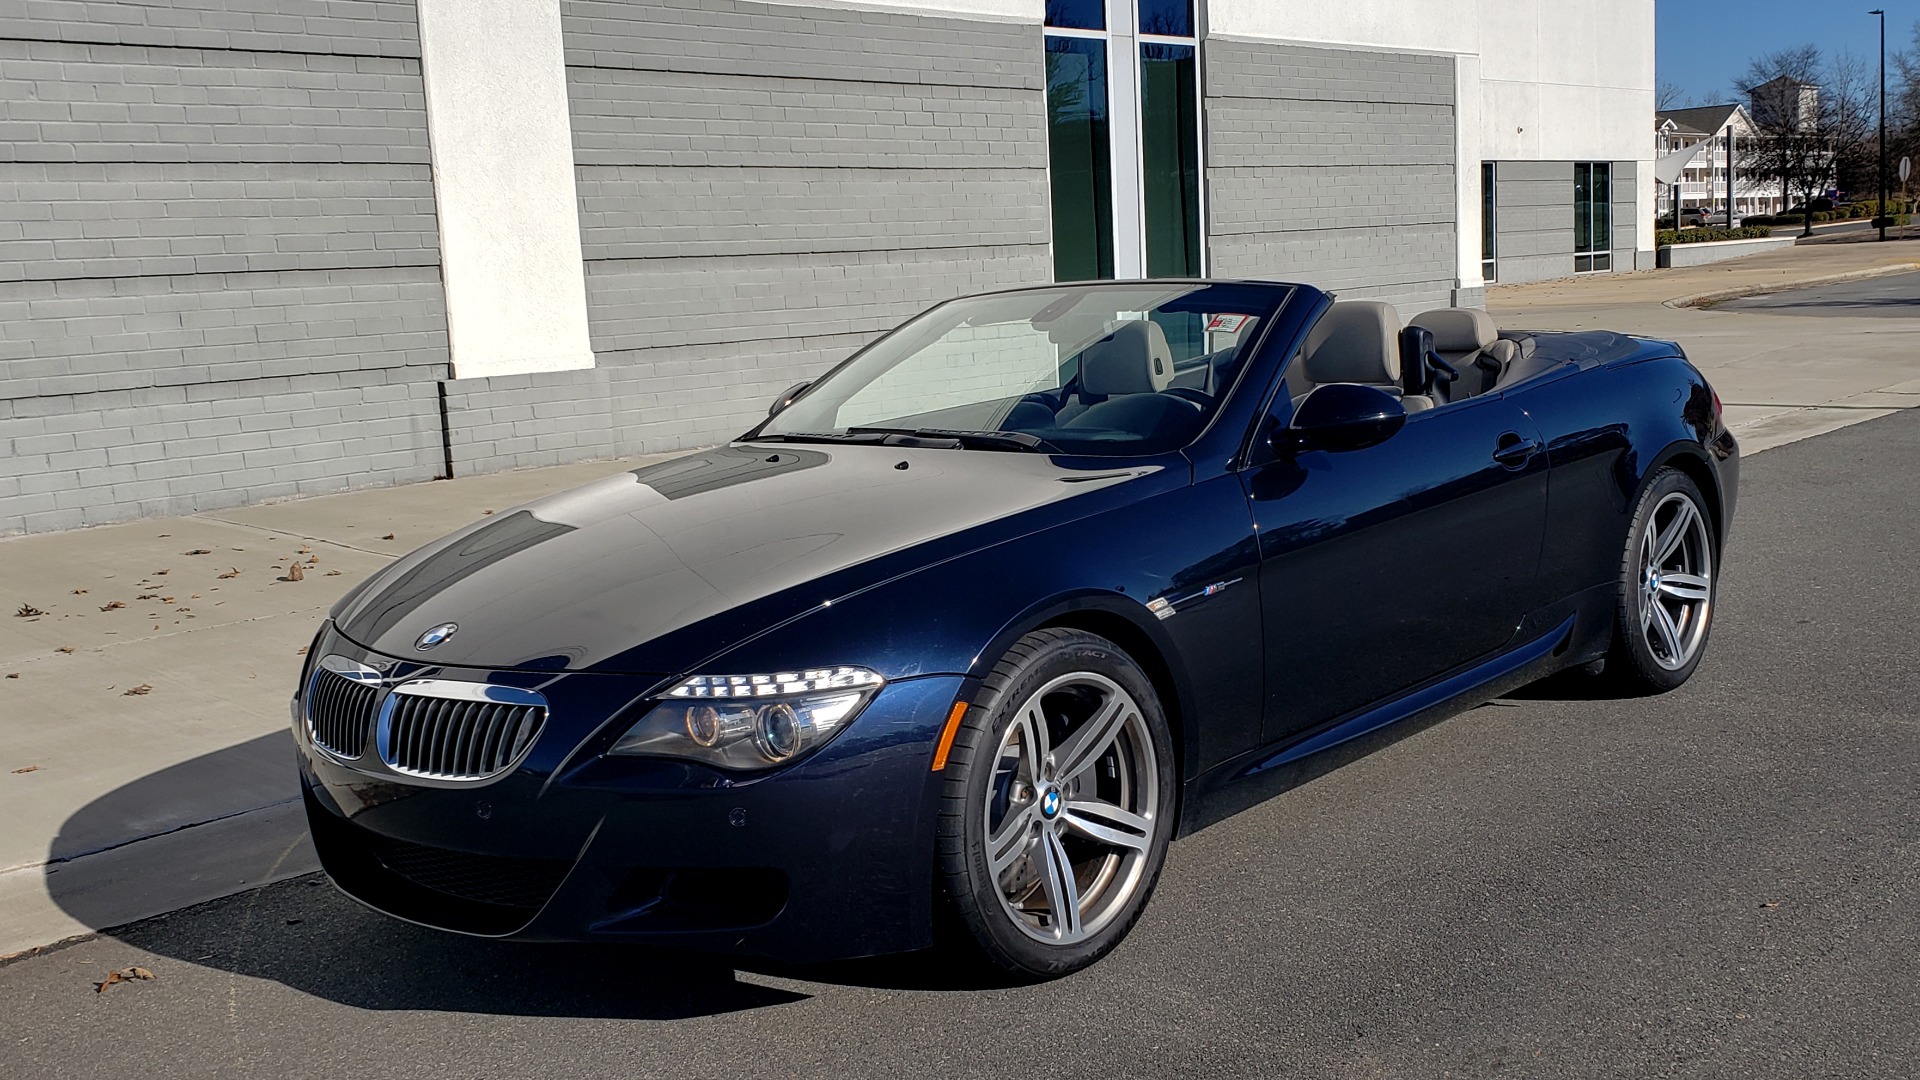 Used 2009 BMW M6 CONVERTIBLE / 5.0L V10 (500HP) / PREM SND / HUD / 19IN  WHEELS For Sale ($25,995) | Formula Imports Stock #FC11148